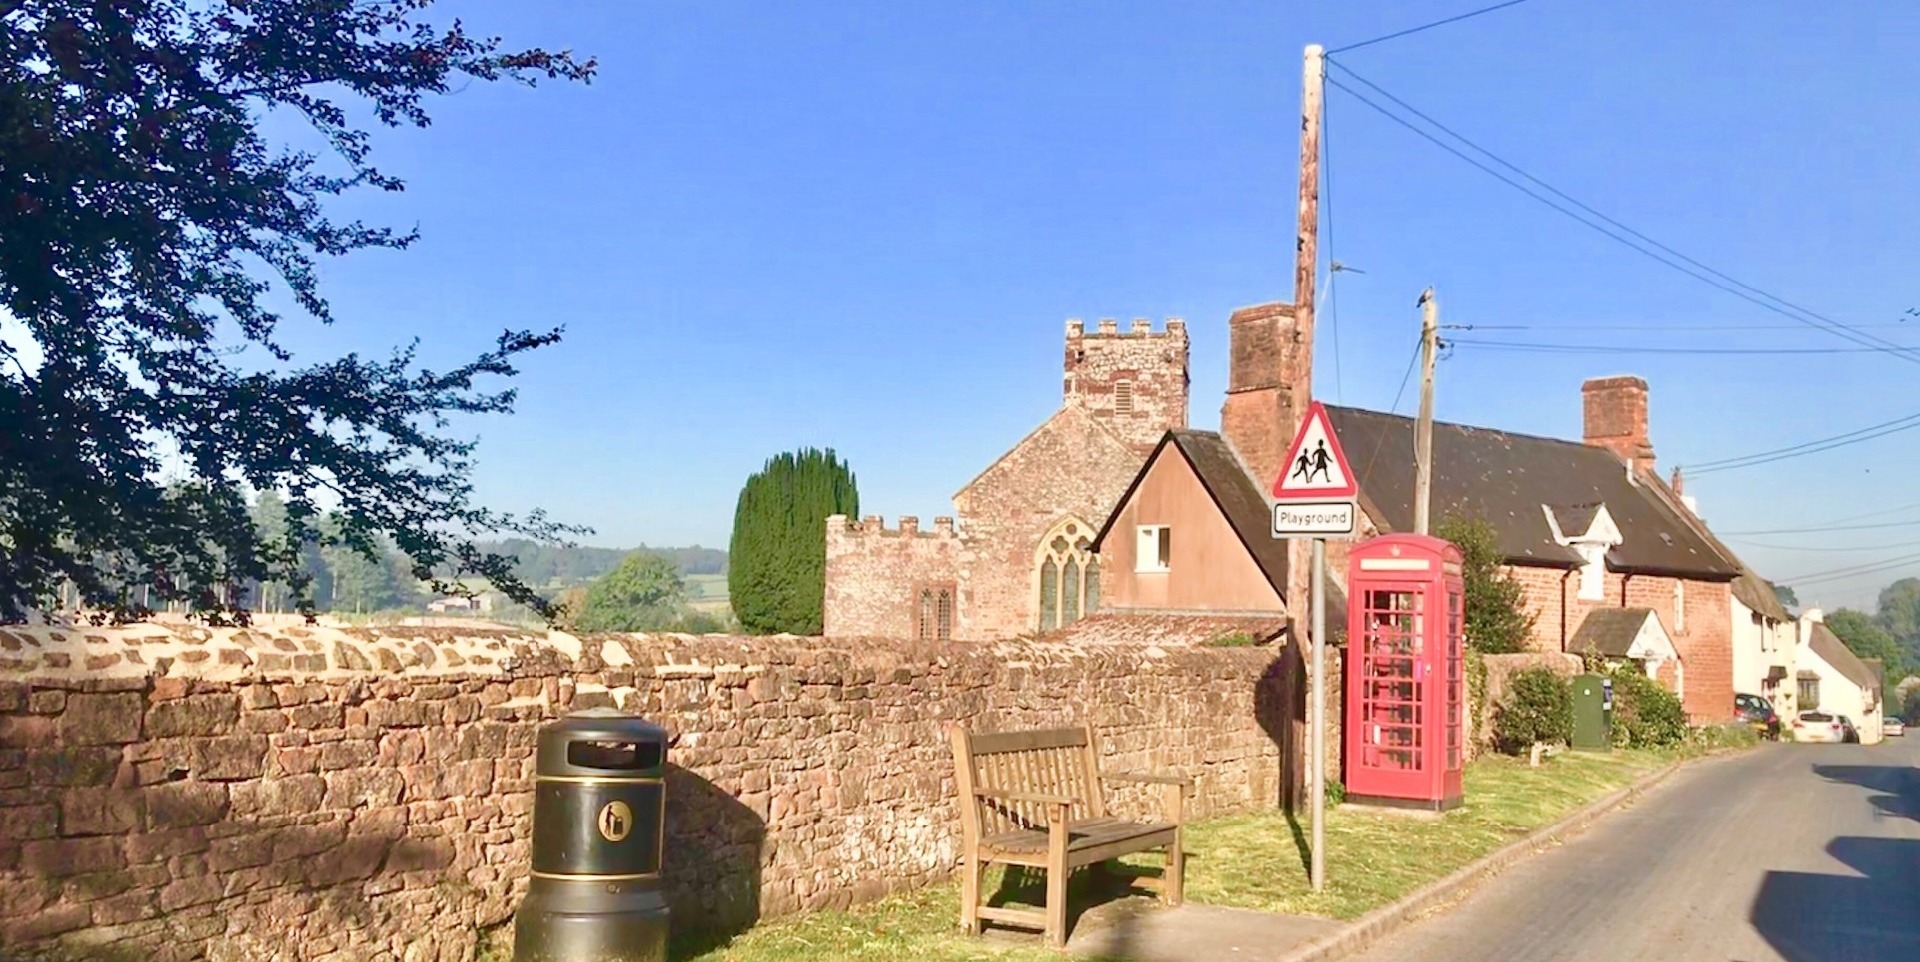 Poltimore Village showing the Church and Phone Box